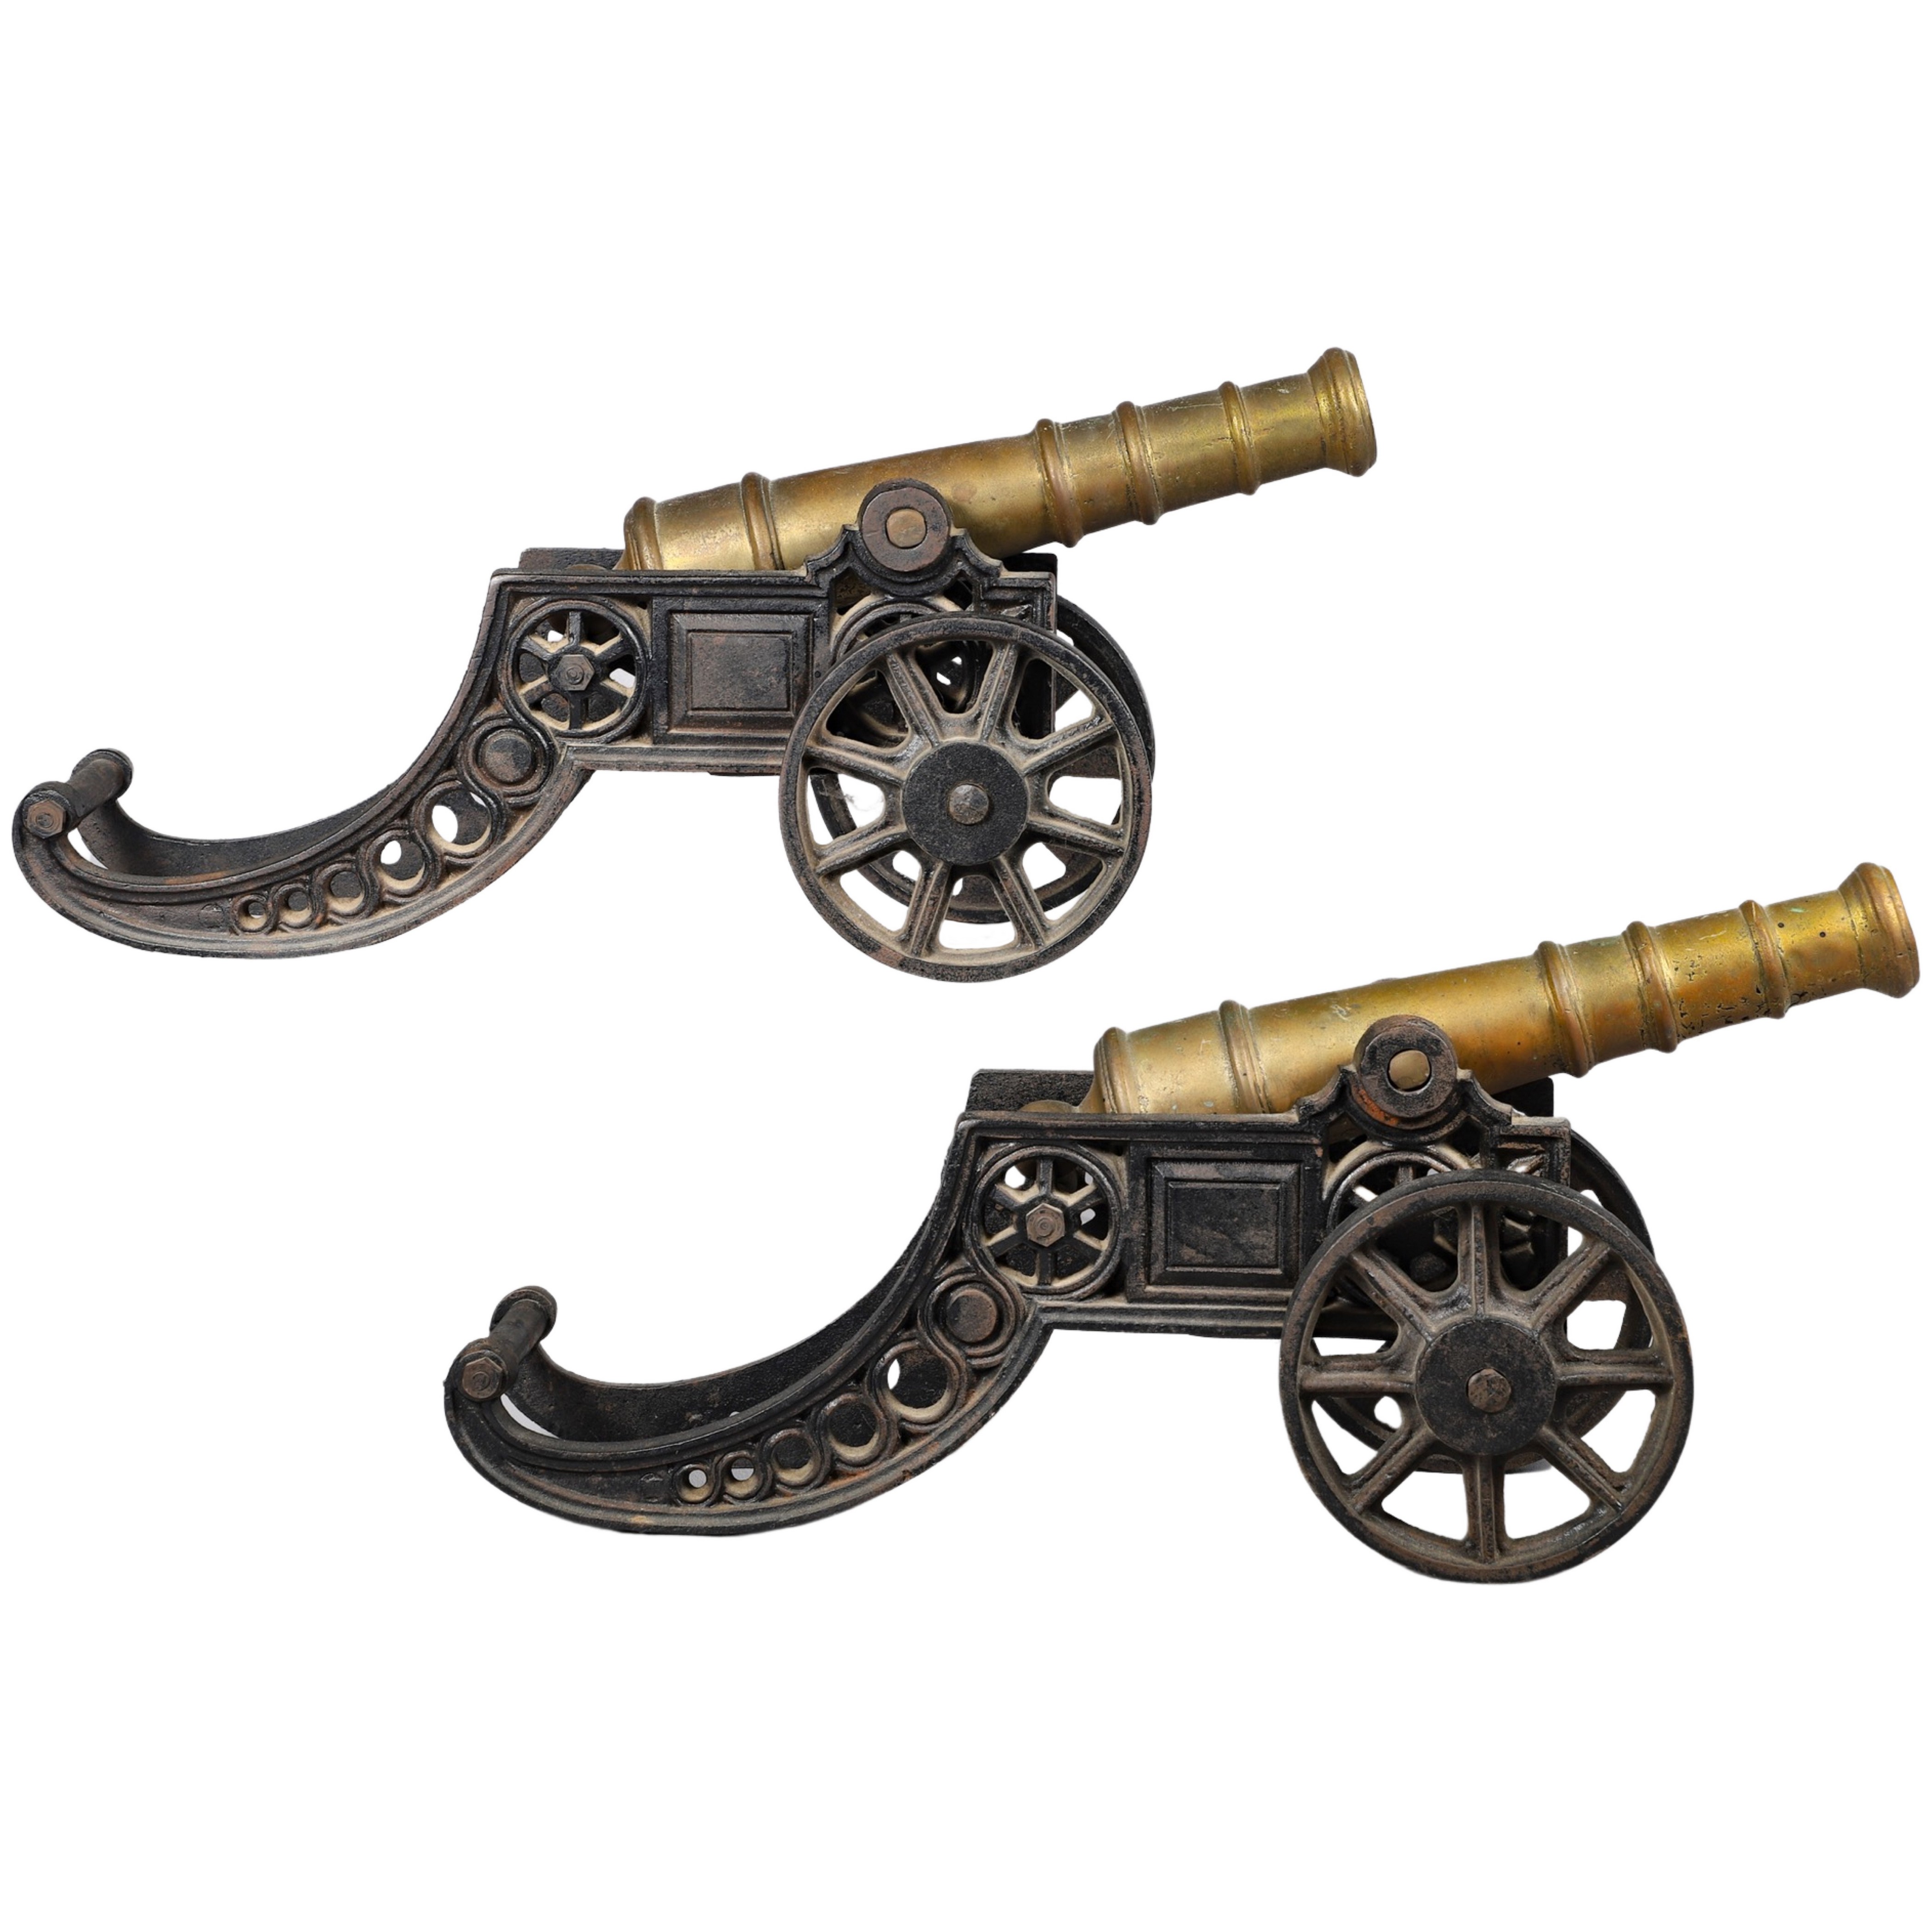 Cast iron and brass cannon pair,